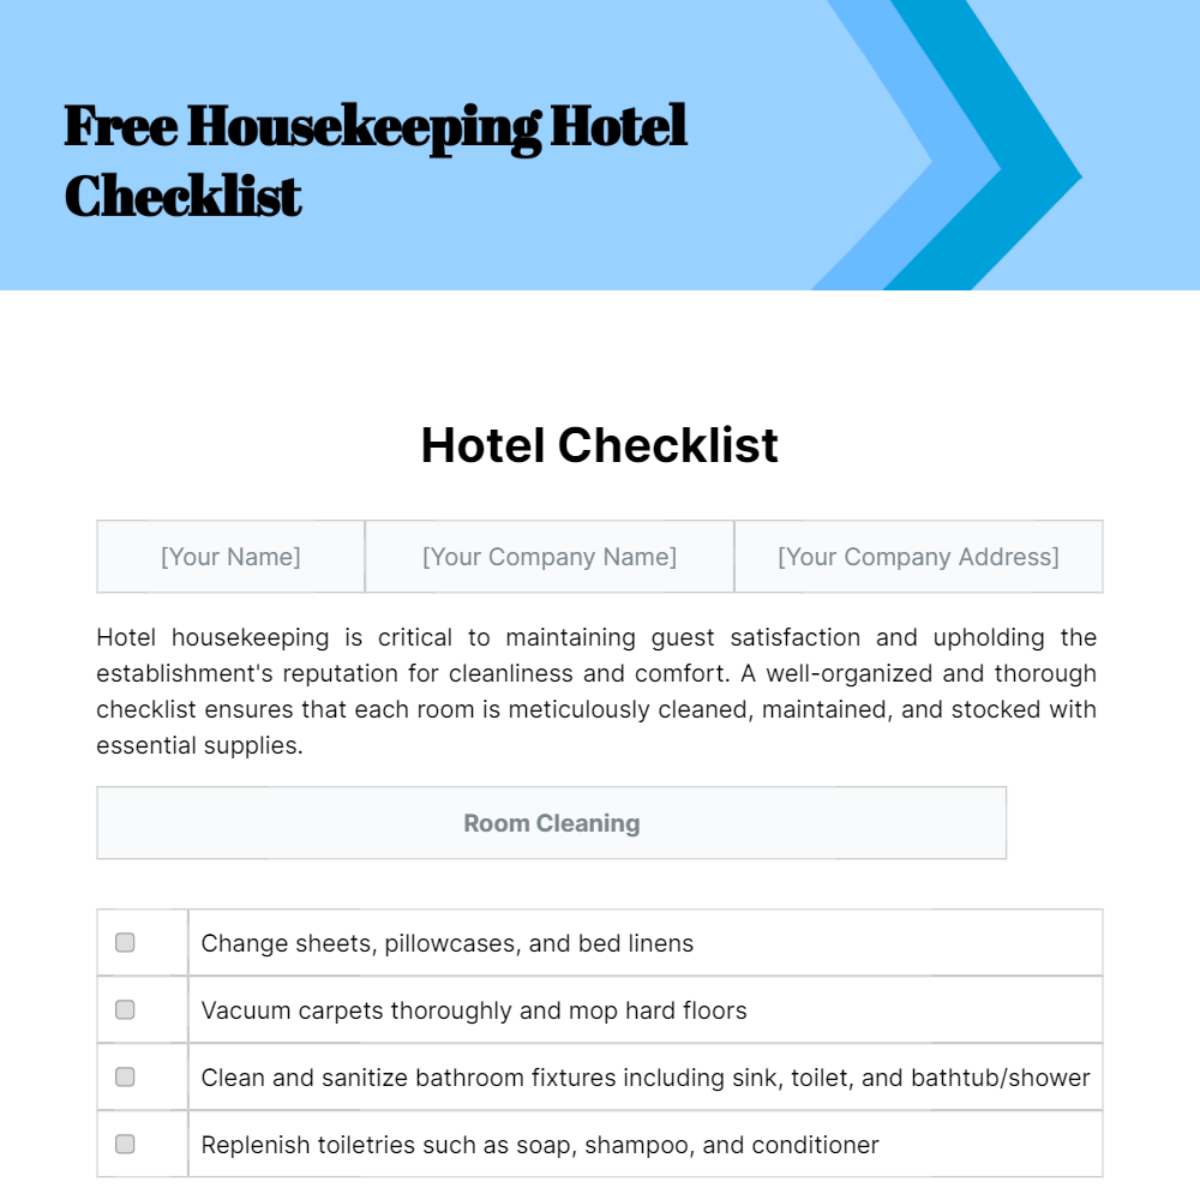 Free Housekeeping Hotel Checklist Template